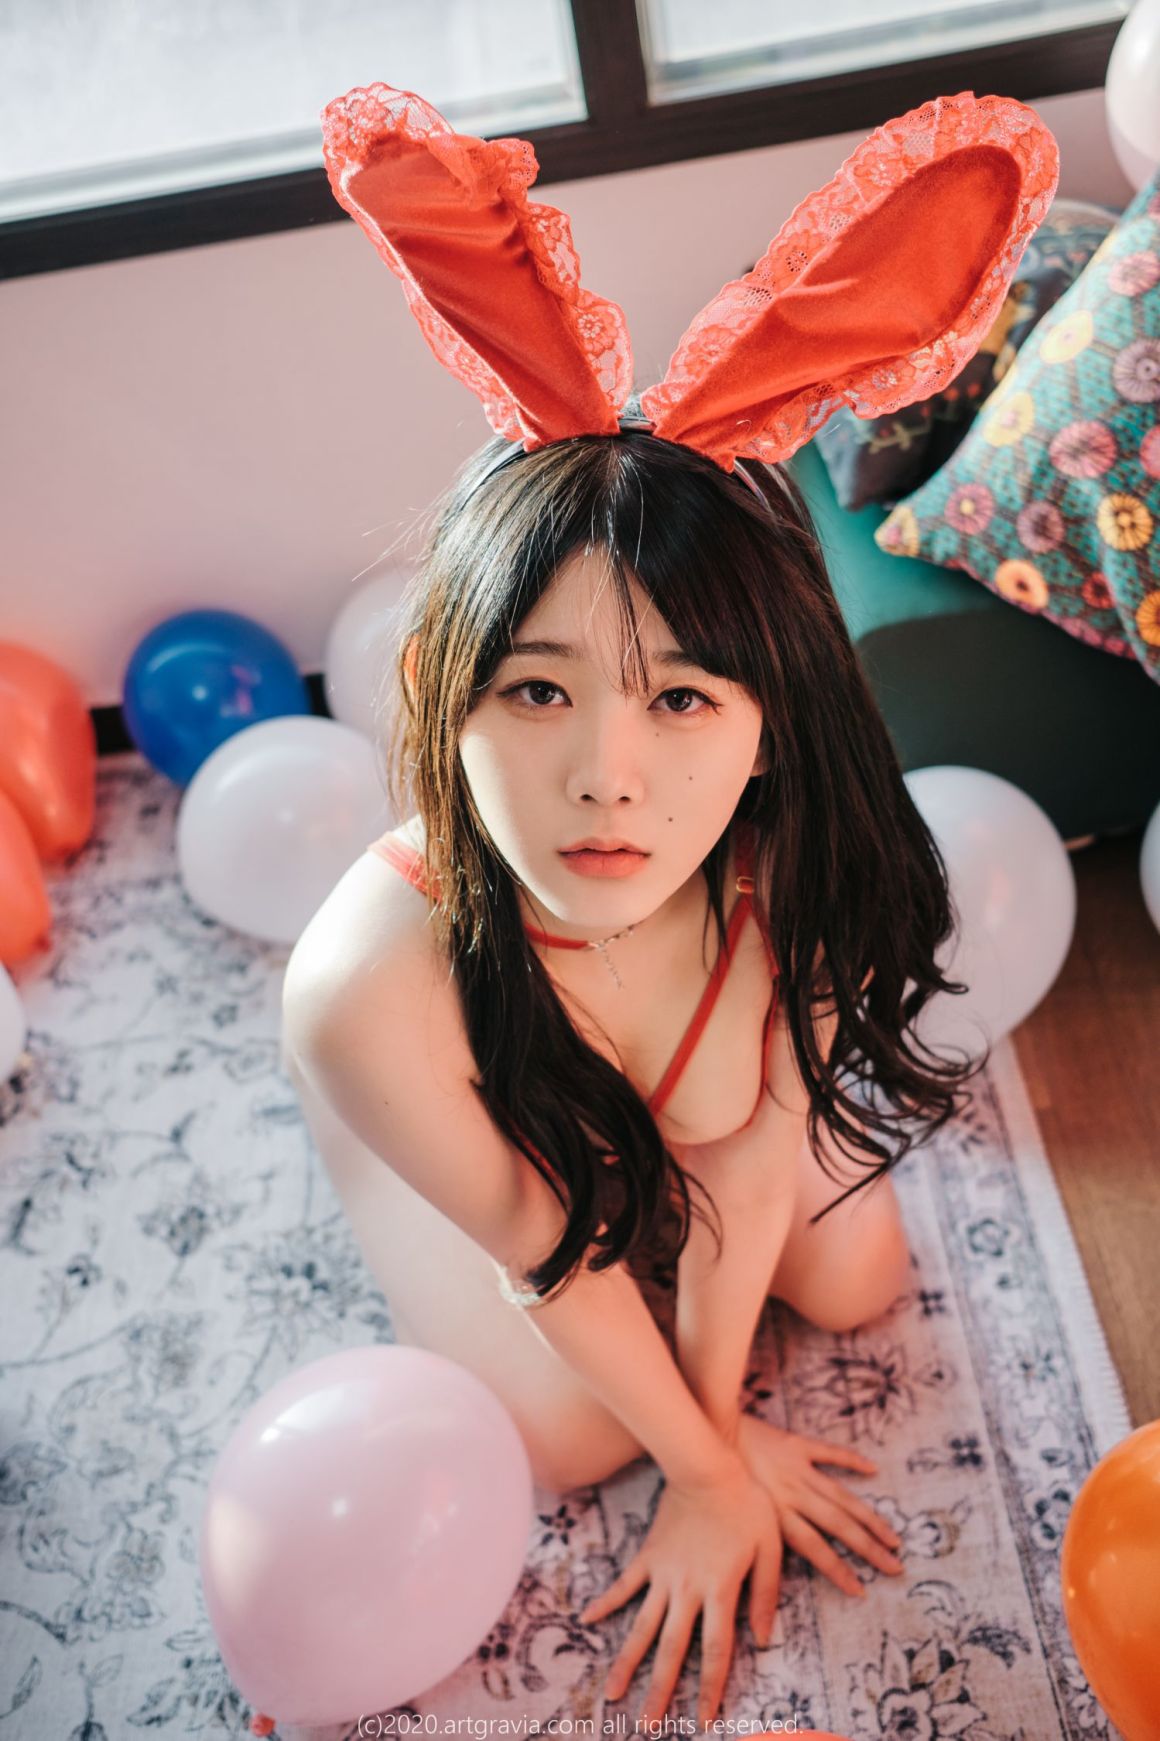 AsianOnlyfans.com 28 328 20211009